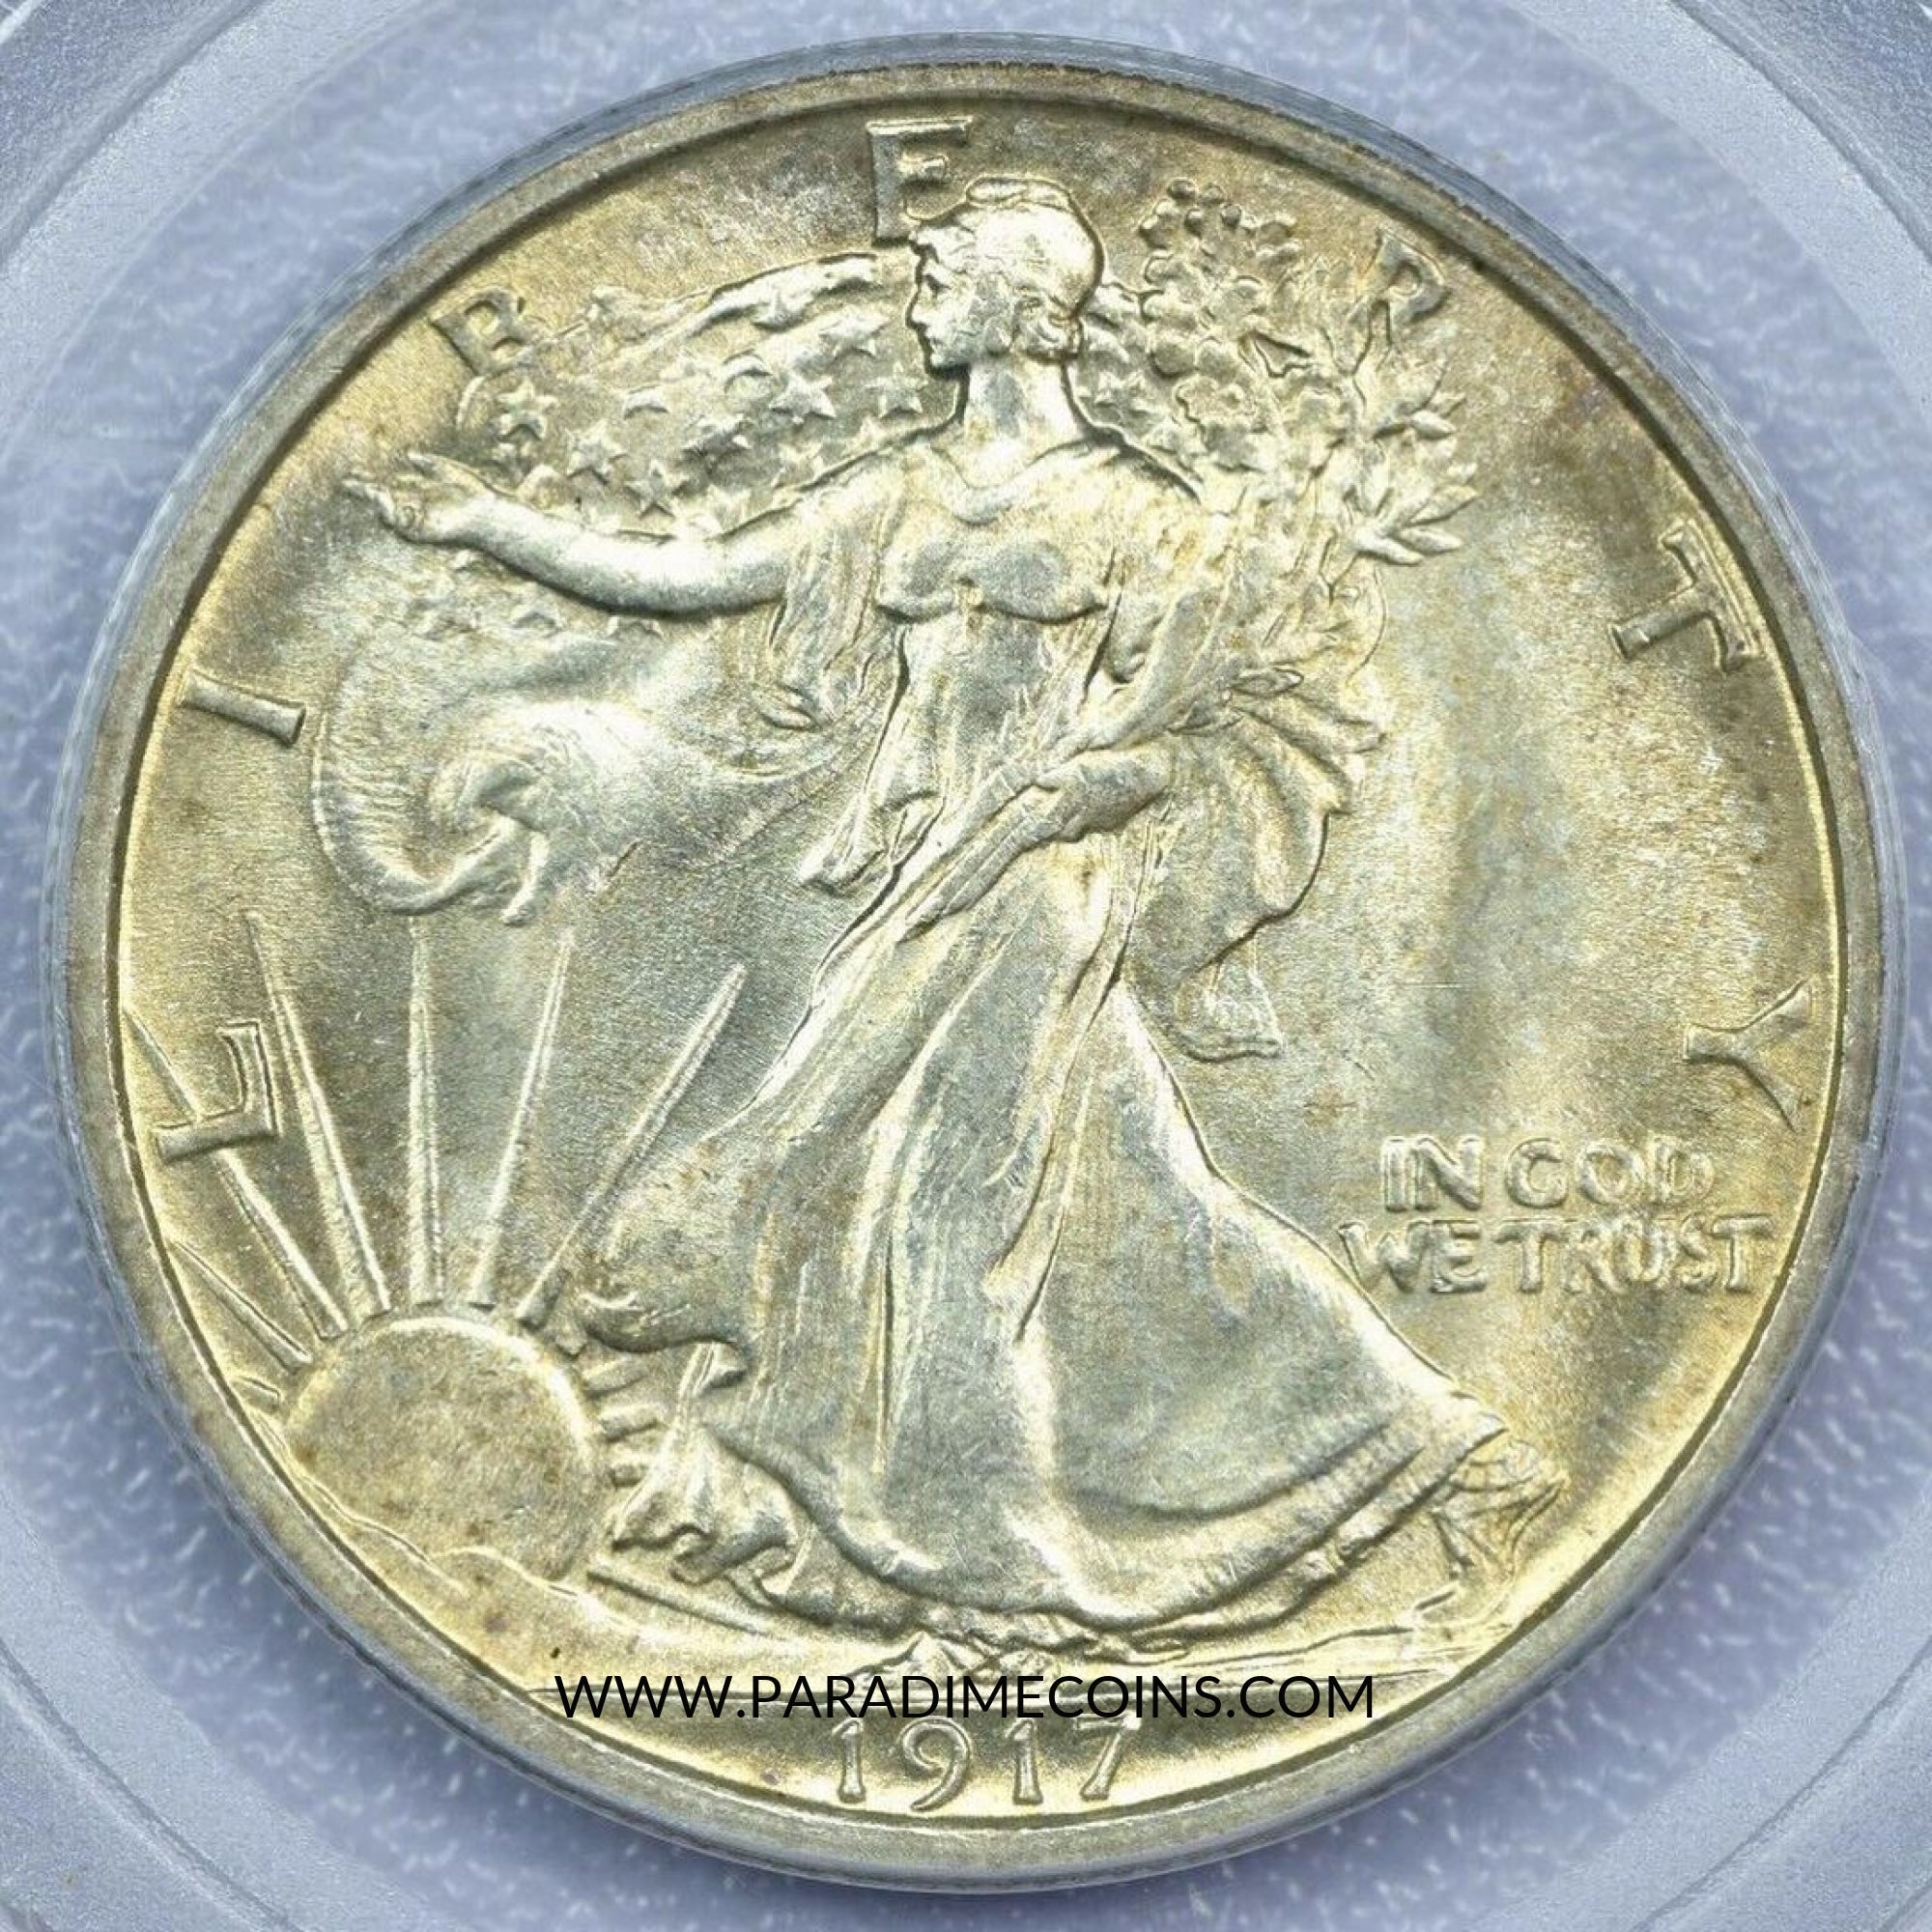 1917 50C MS65 PCGS CAC - Paradime Coins | PCGS NGC CACG CAC Rare US Numismatic Coins For Sale